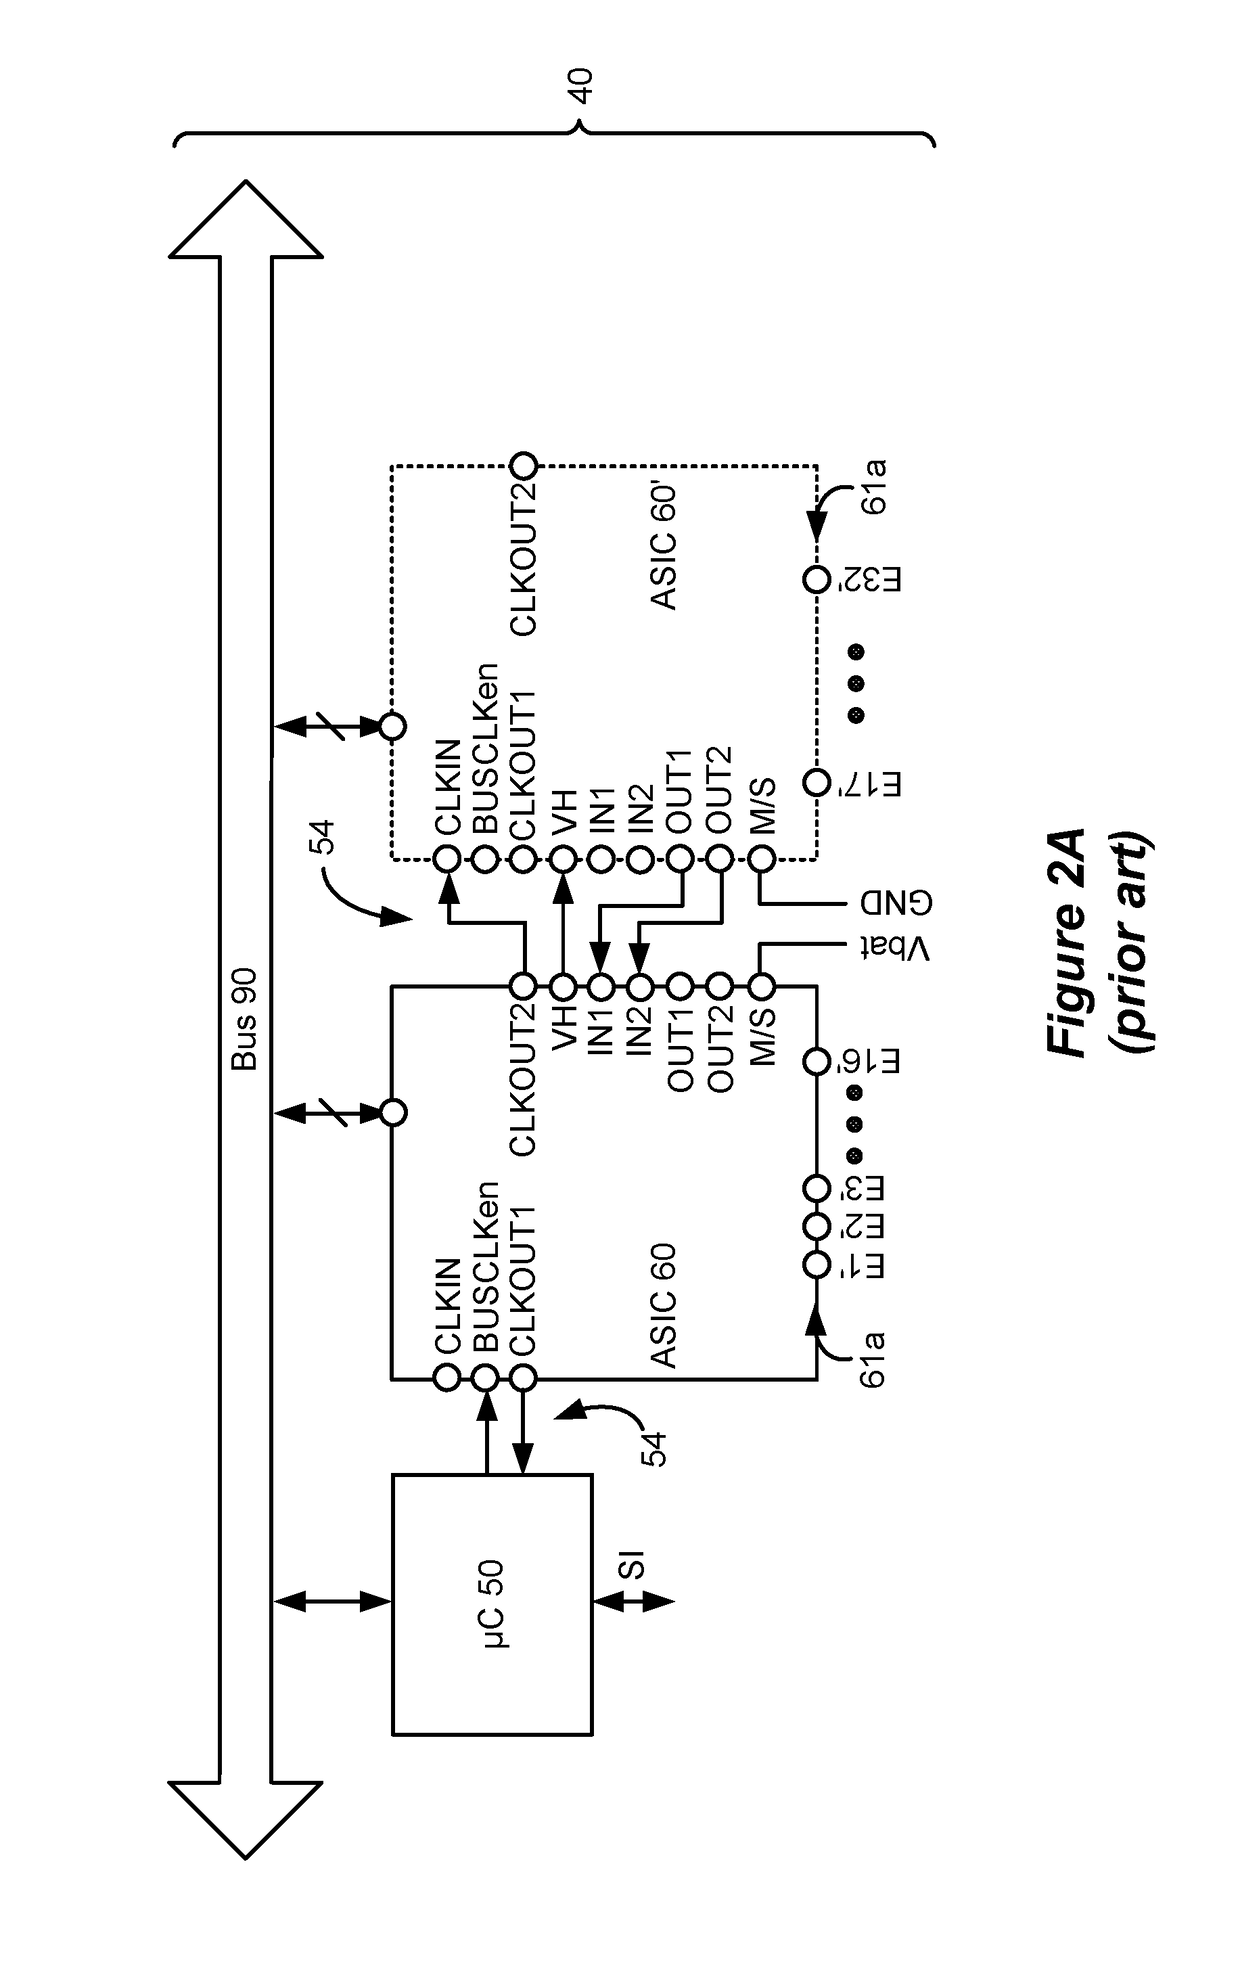 Current Generation Architecture for an Implantable Stimulator Device to Promote Current Steering Between Electrodes